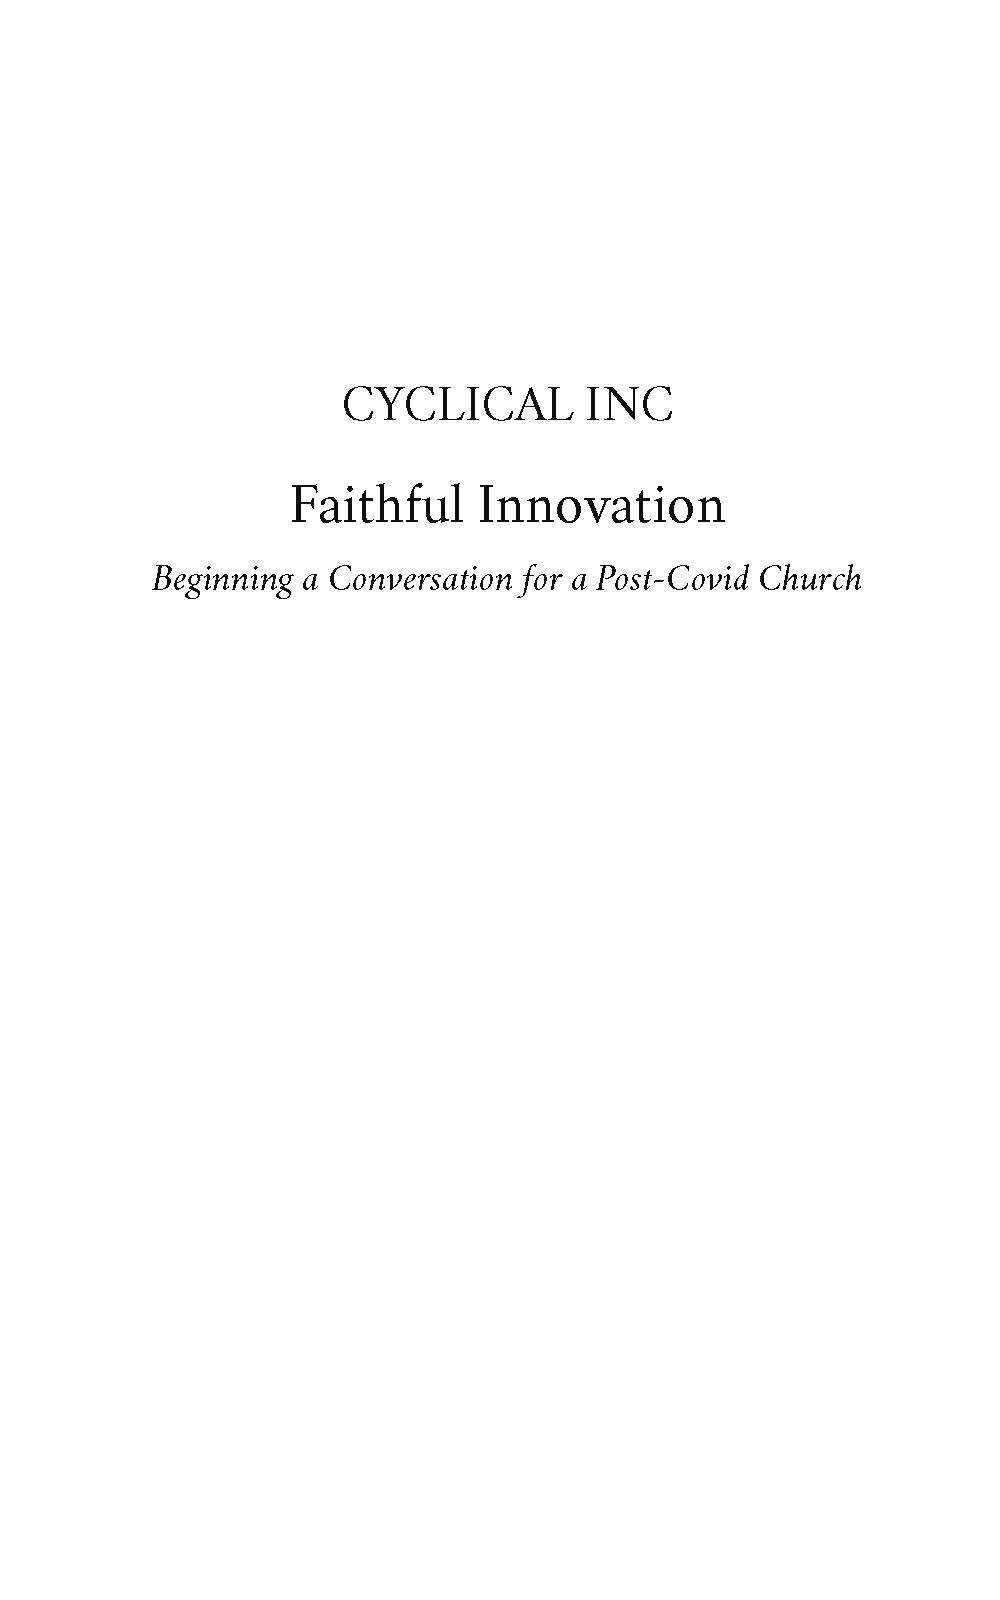 faithful-innovation reader preview_Page_03.jpg